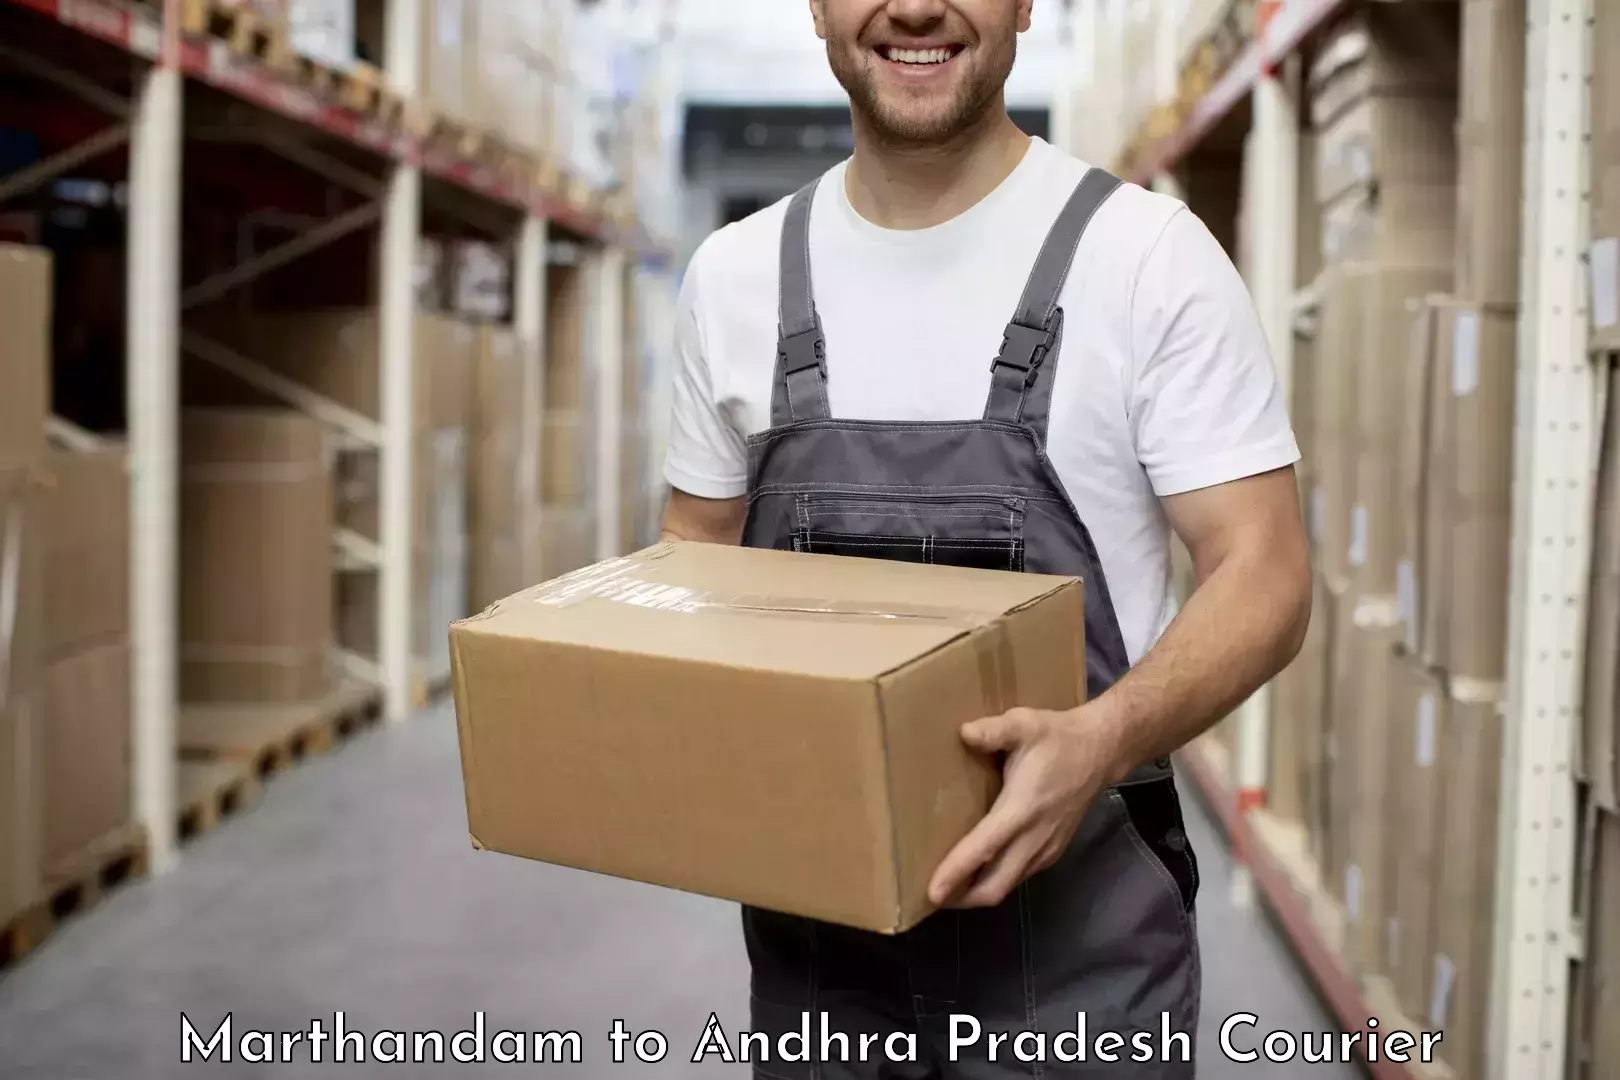 State-of-the-art courier technology Marthandam to Galiveedu